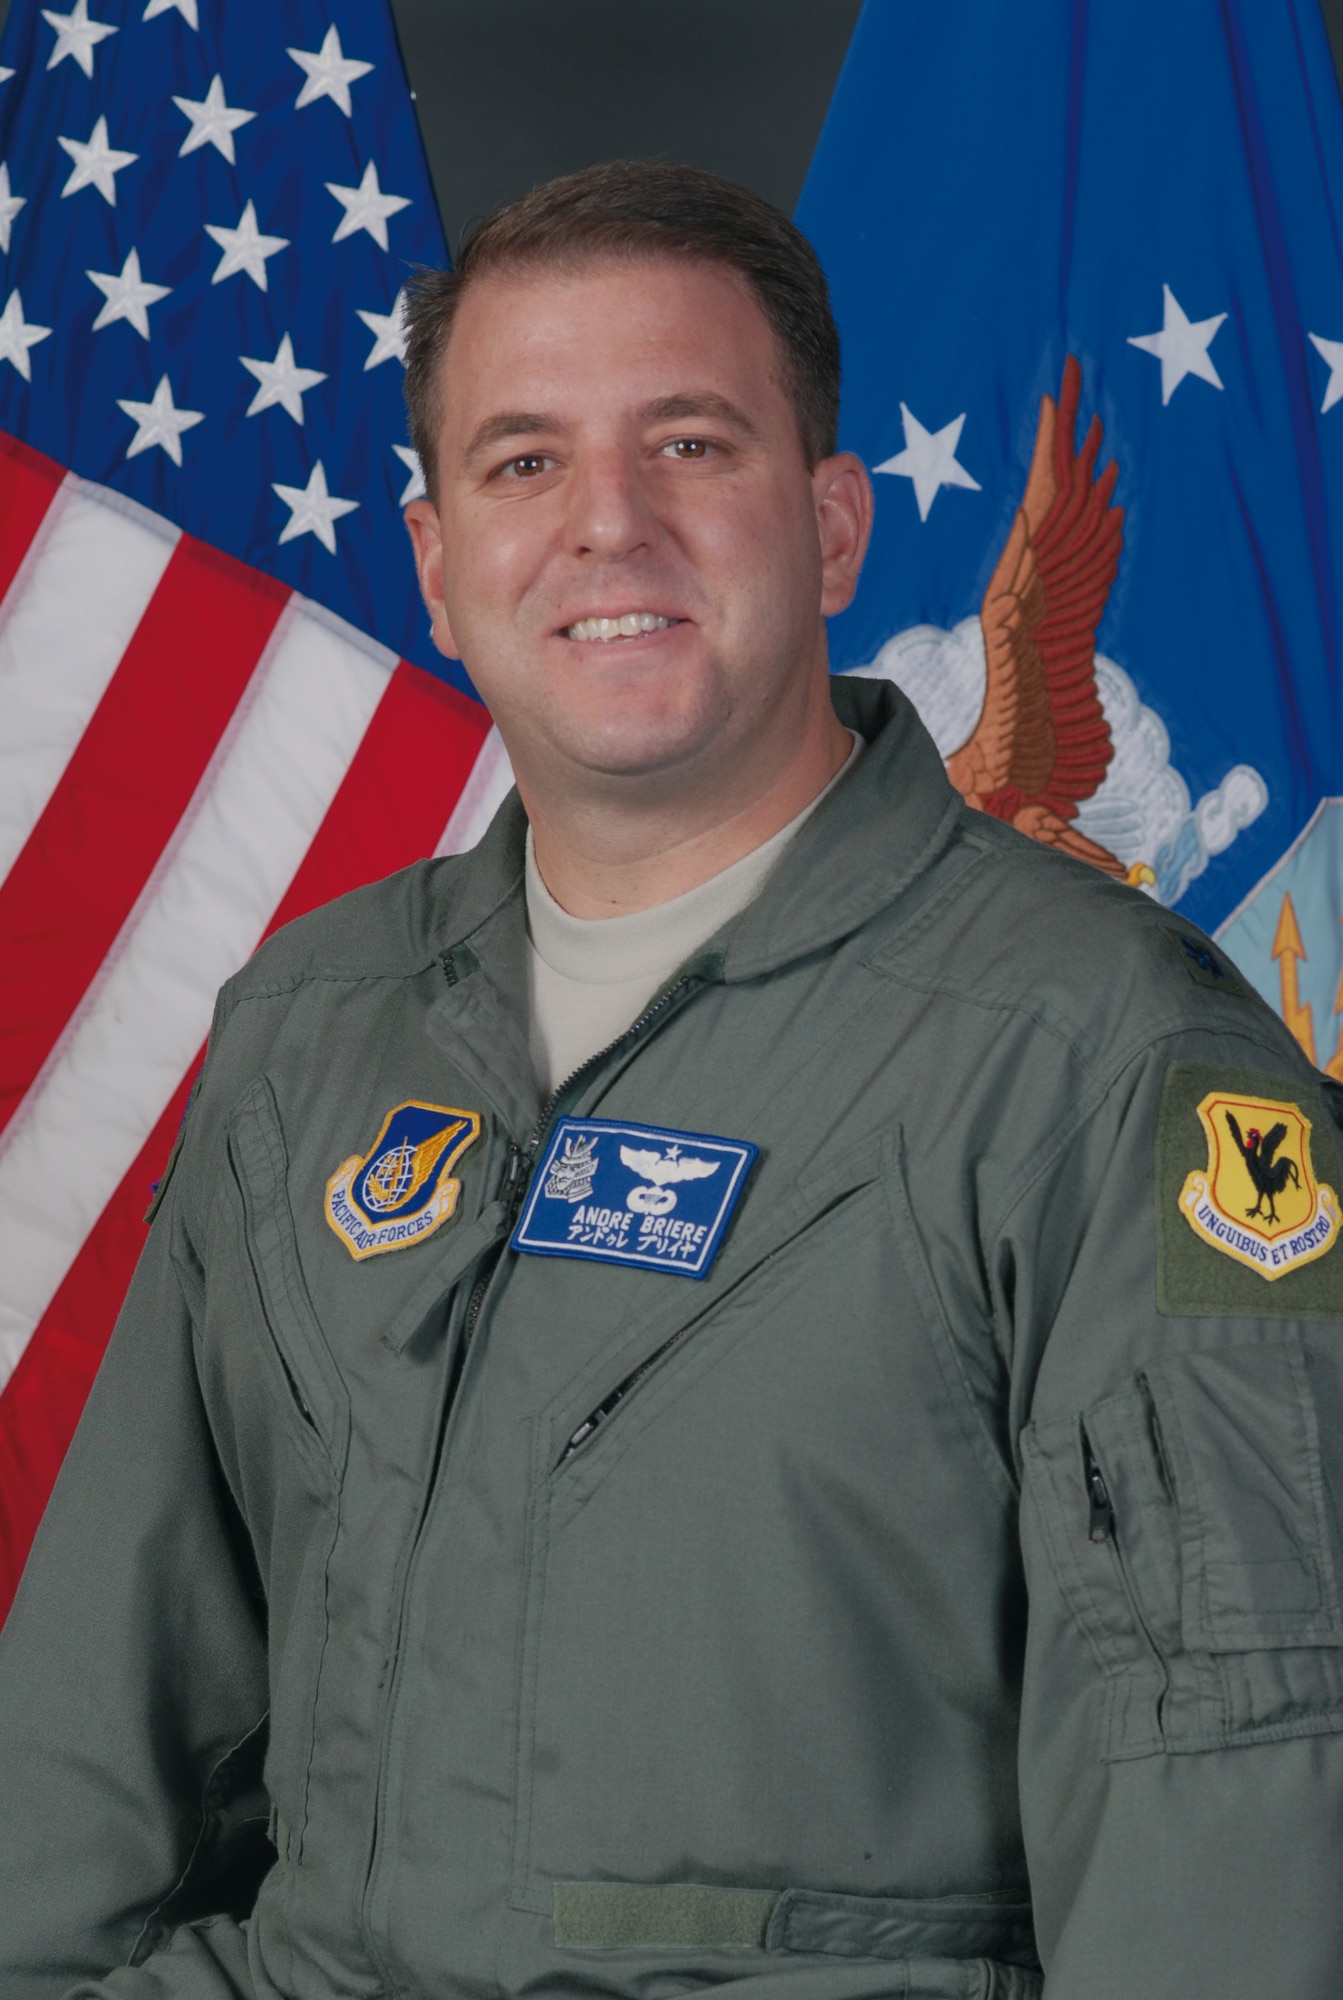 Lt. Col. Andre Briere, 18th Wing Chief of Safety
